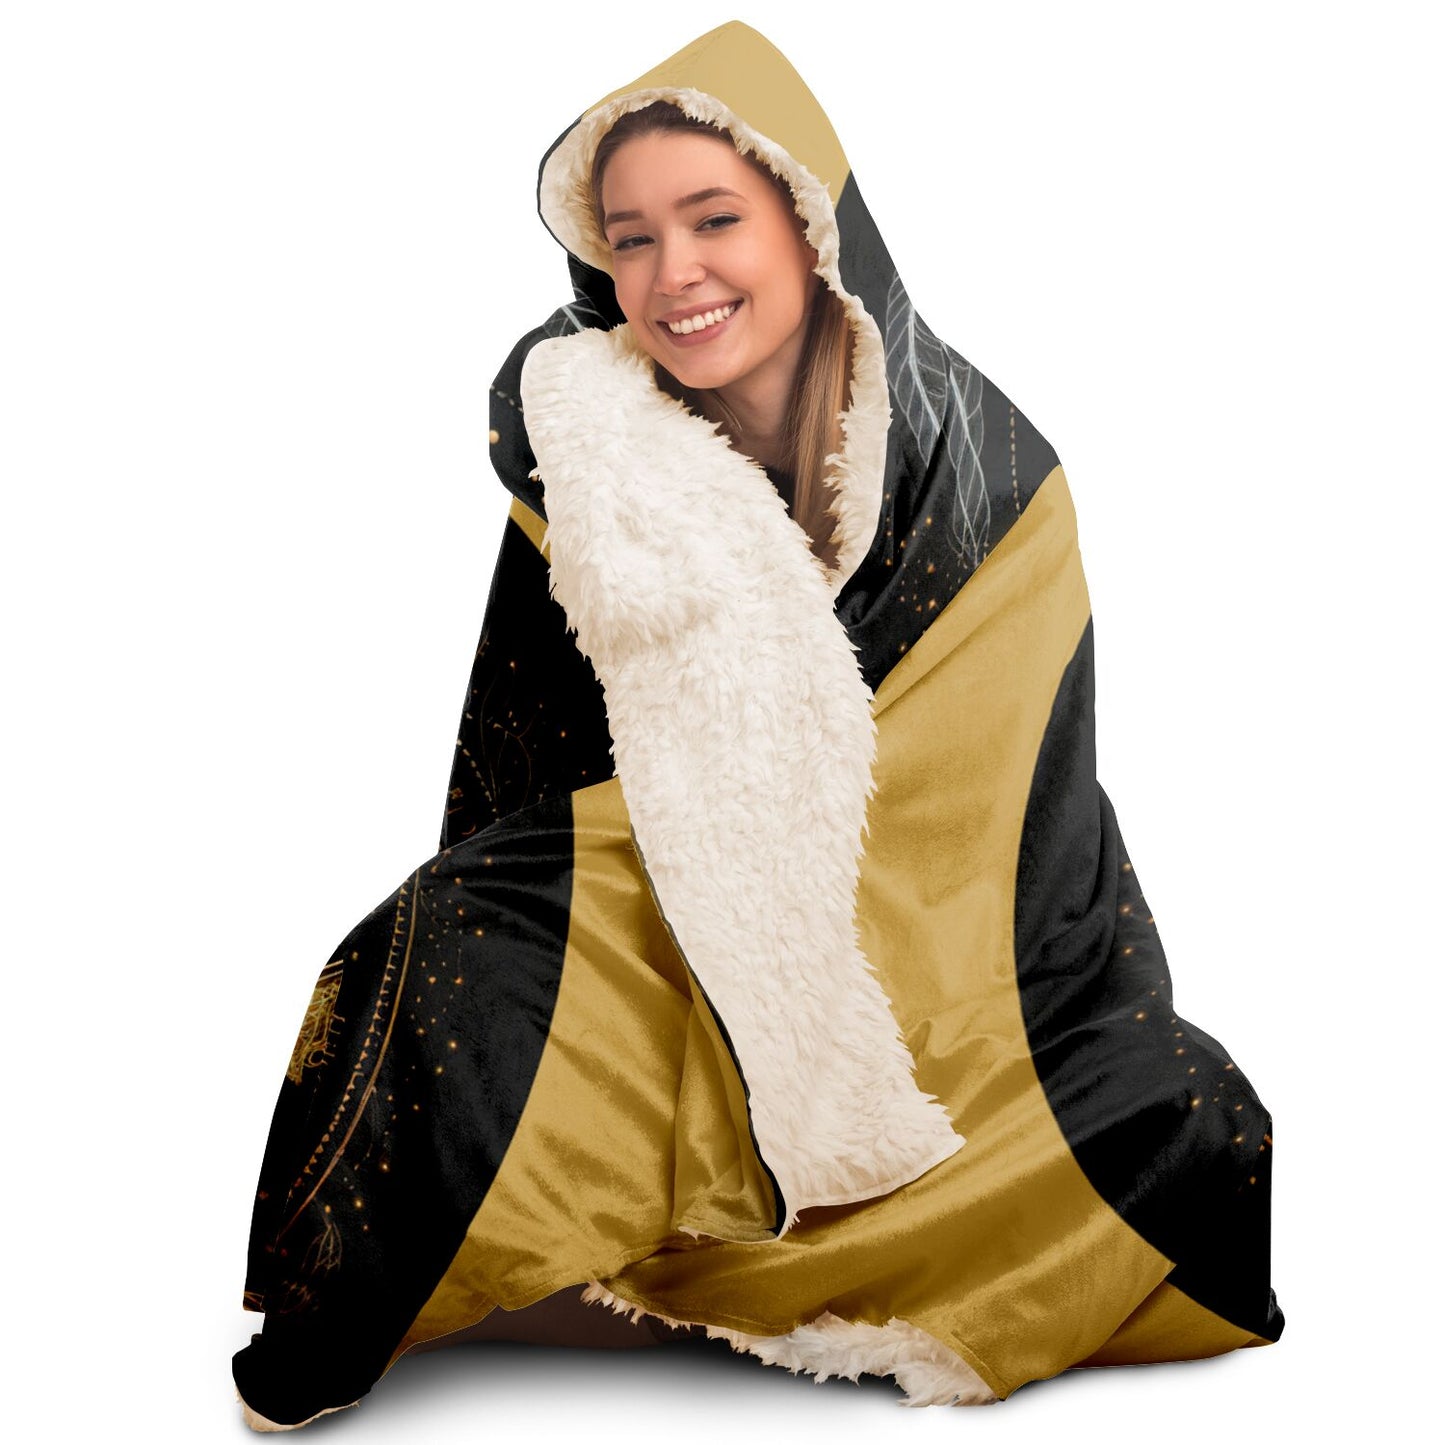 Libra Scales in Black and Gold Hooded Blanket